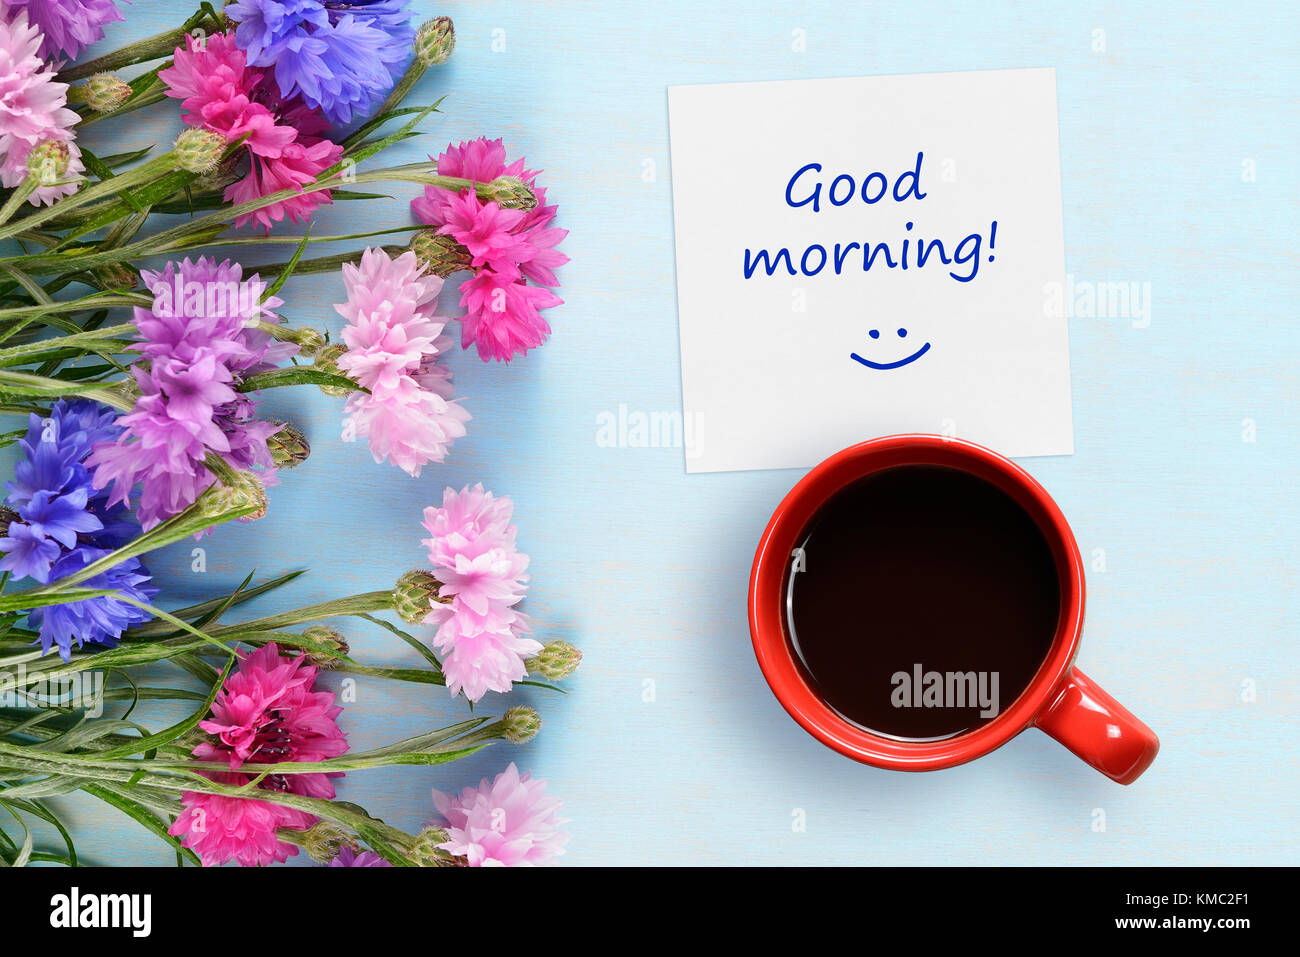 Good morning wishes, coffee cup and cornflowers on blue background ...